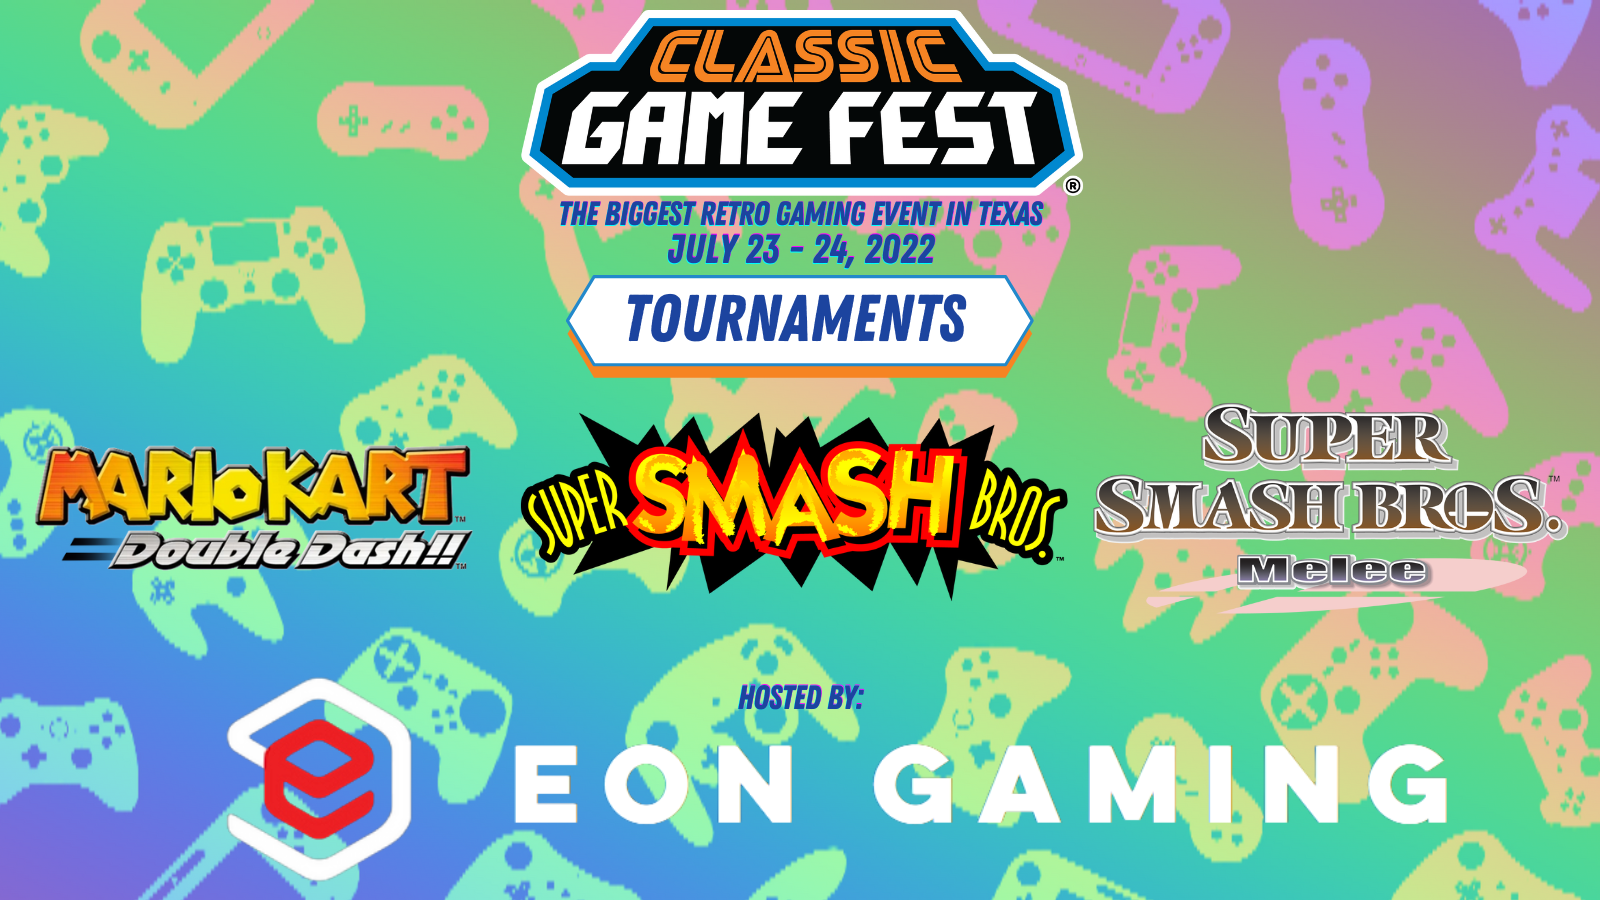 Tournaments at CGF Classic Game Fest